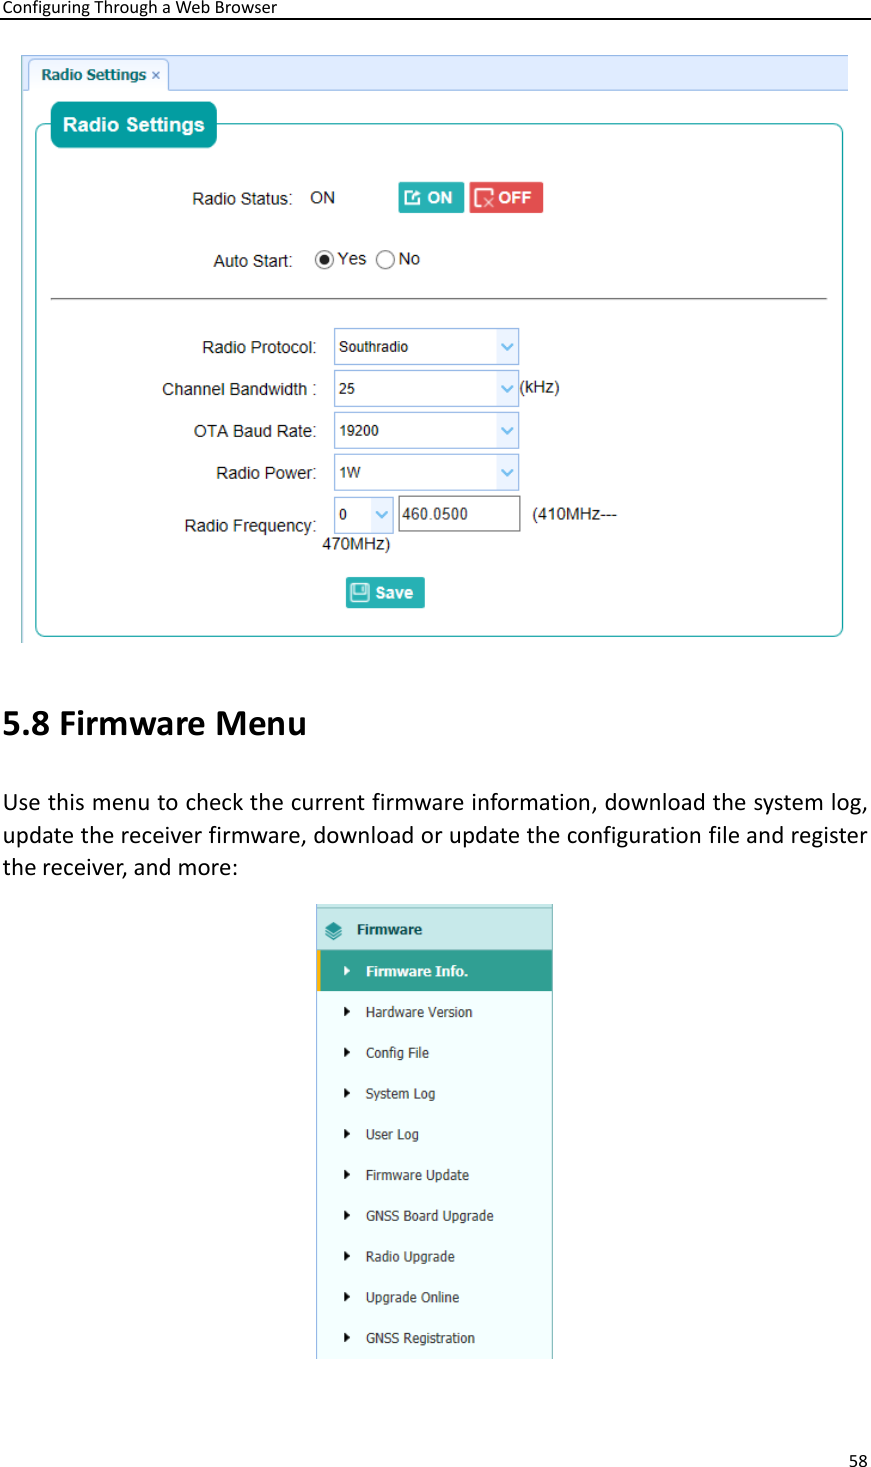 Configuring Through a Web Browser 58   5.8 Firmware Menu Use this menu to check the current firmware information, download the system log, update the receiver firmware, download or update the configuration file and register the receiver, and more:    